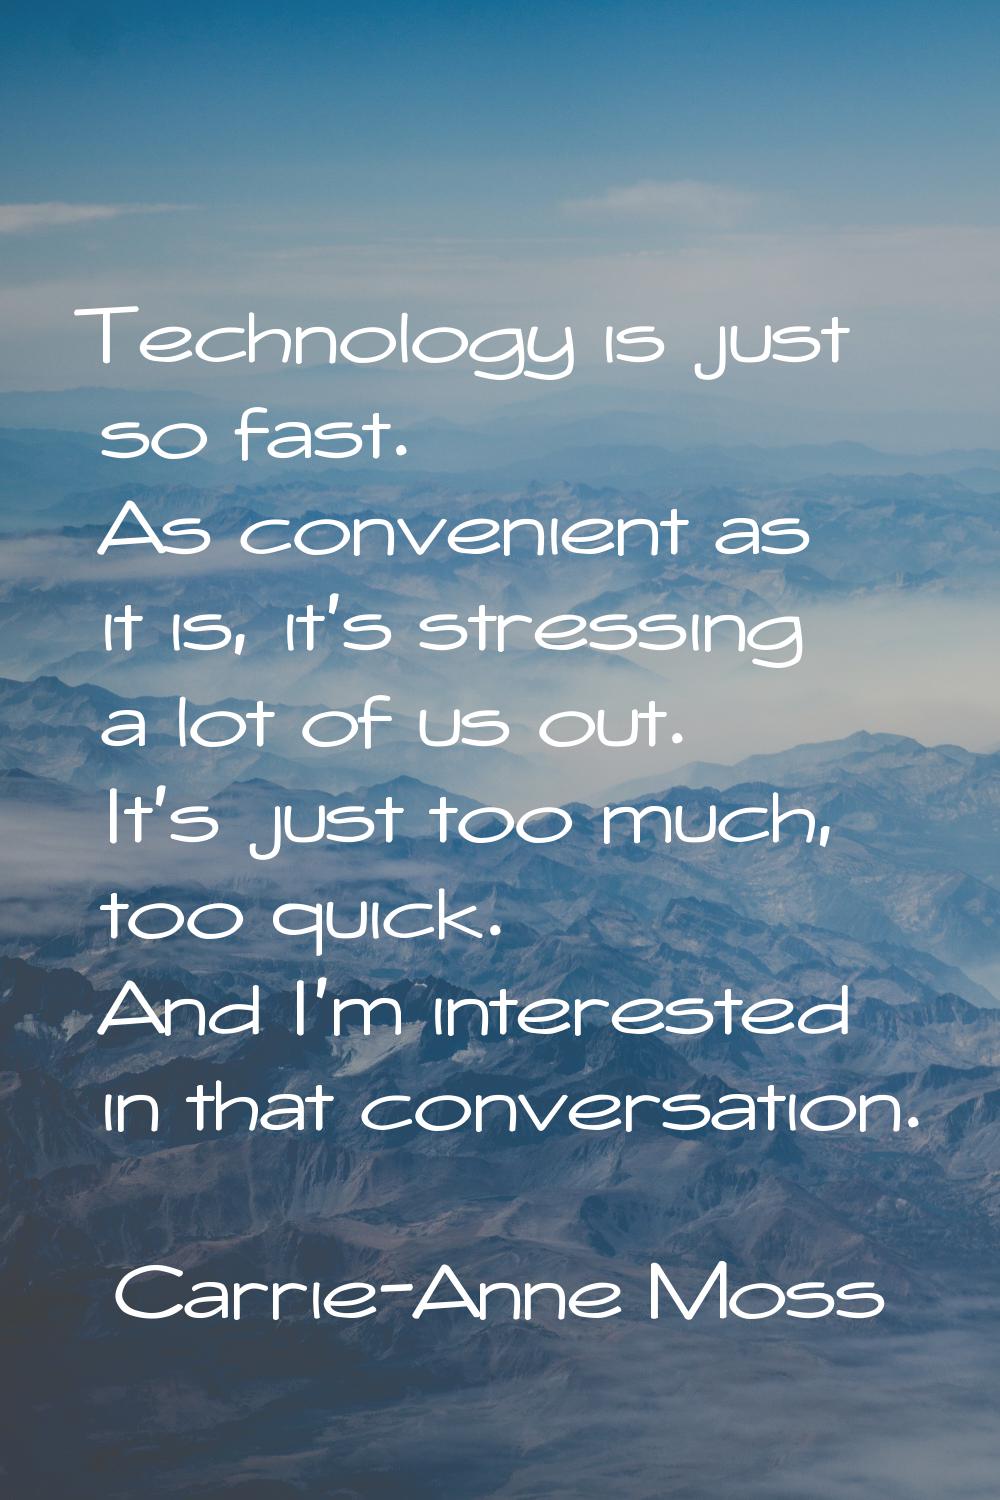 Technology is just so fast. As convenient as it is, it's stressing a lot of us out. It's just too m